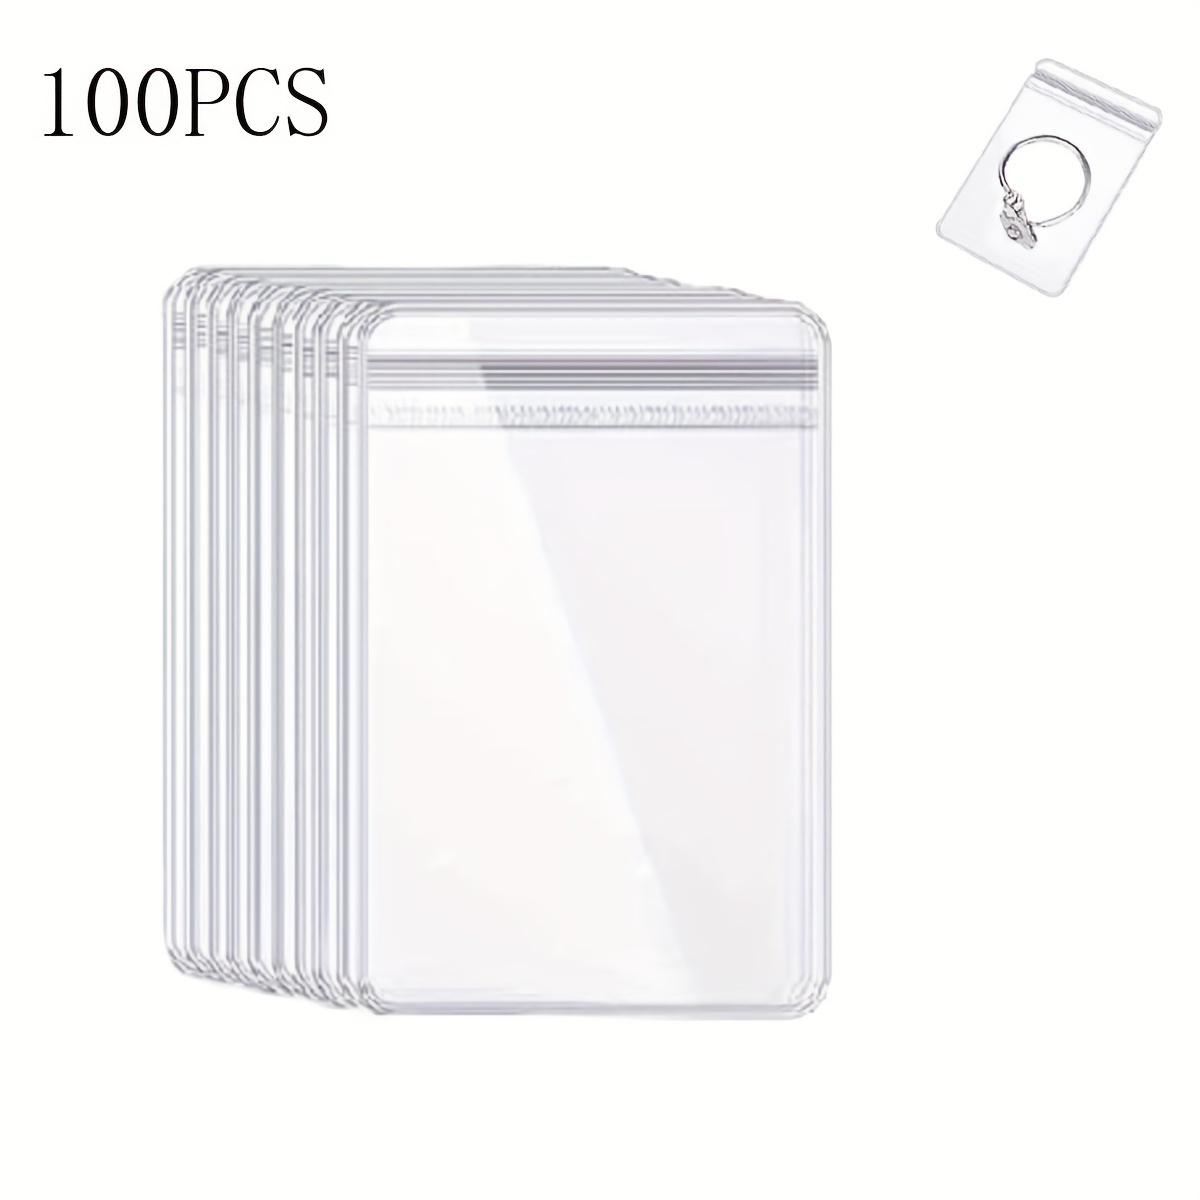 100pcs Jewelry Bags Self Seal Jewelry Storage Bags Clear Pvc